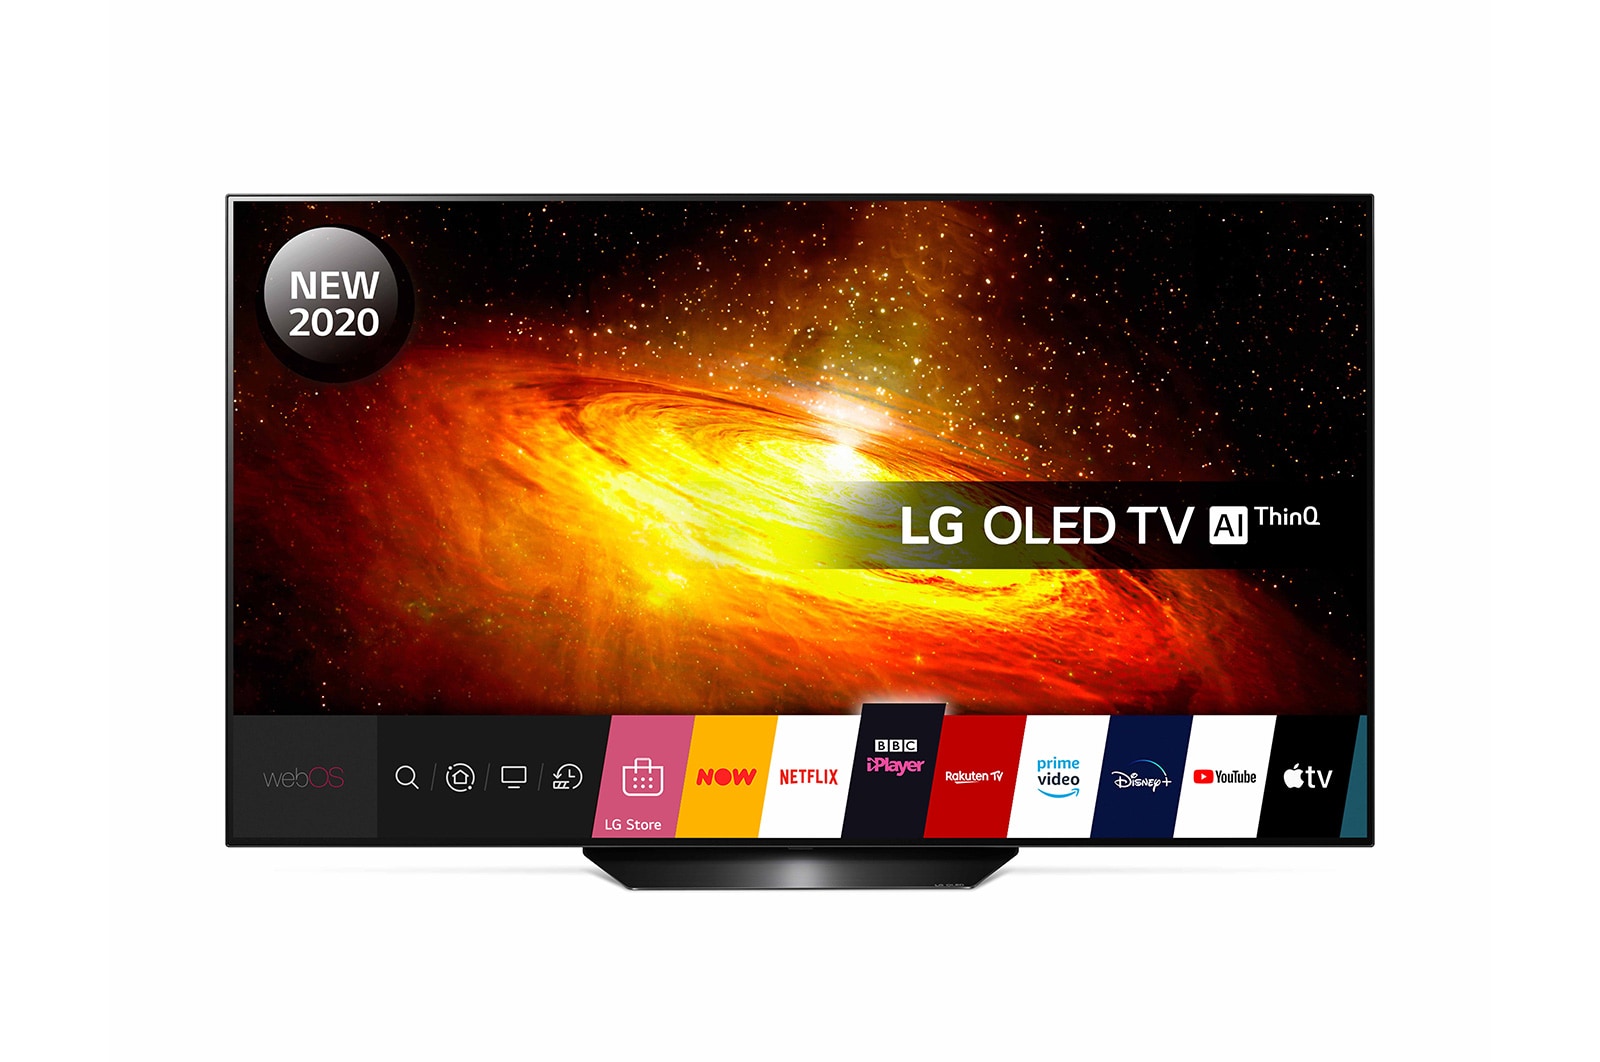 OLED LG 65BX6LB 65" 4K Smart TV HDR OLED ai WIFI Freeview/Freesat orizzontale. 